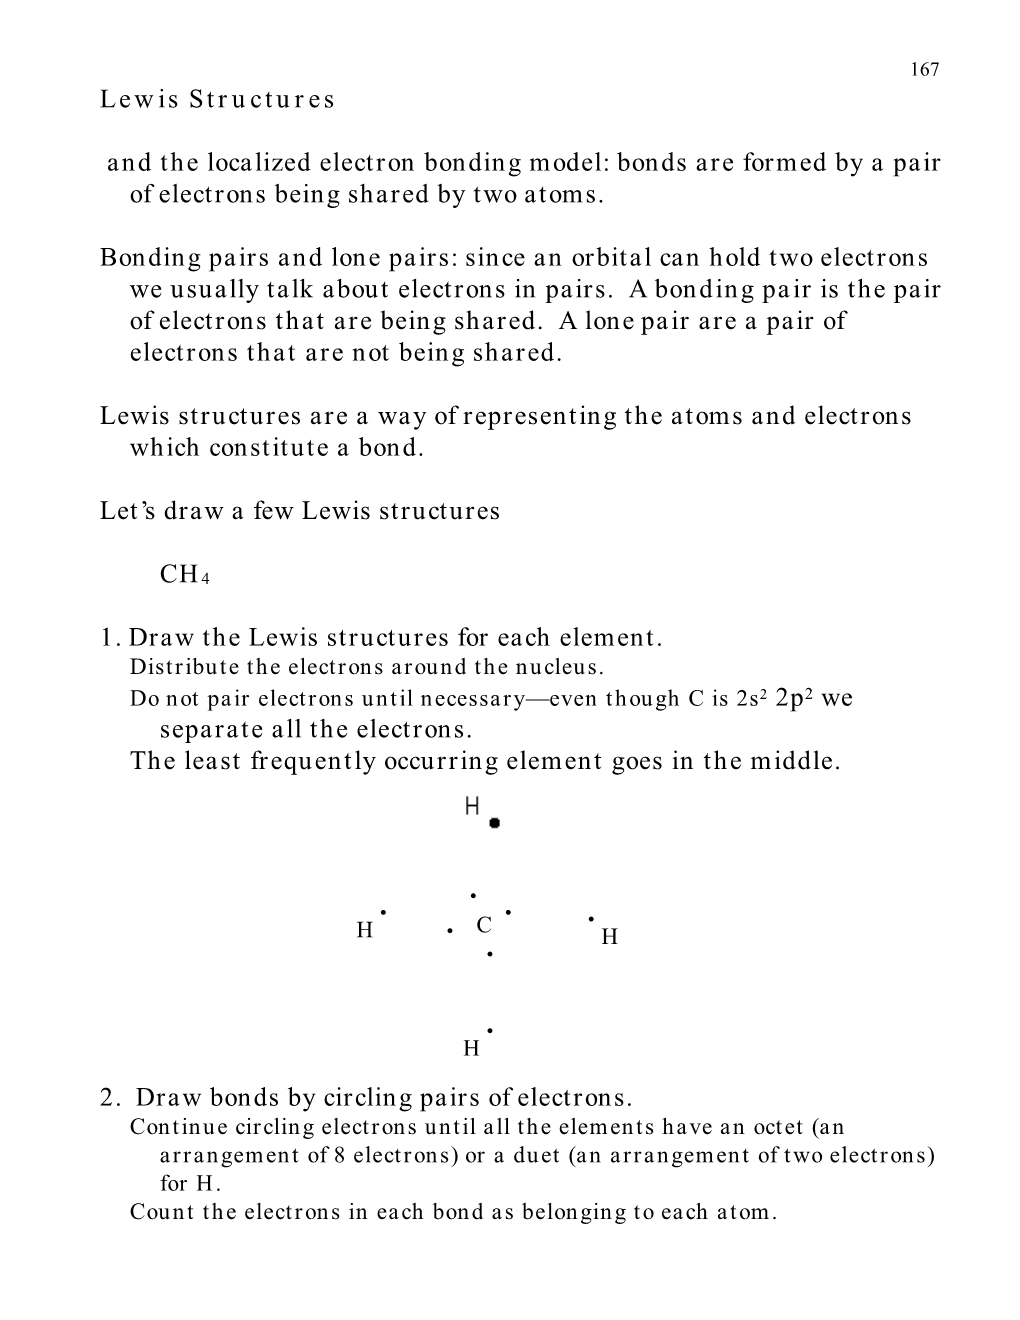 Lewis Structures and the Localized Electron Bonding Model